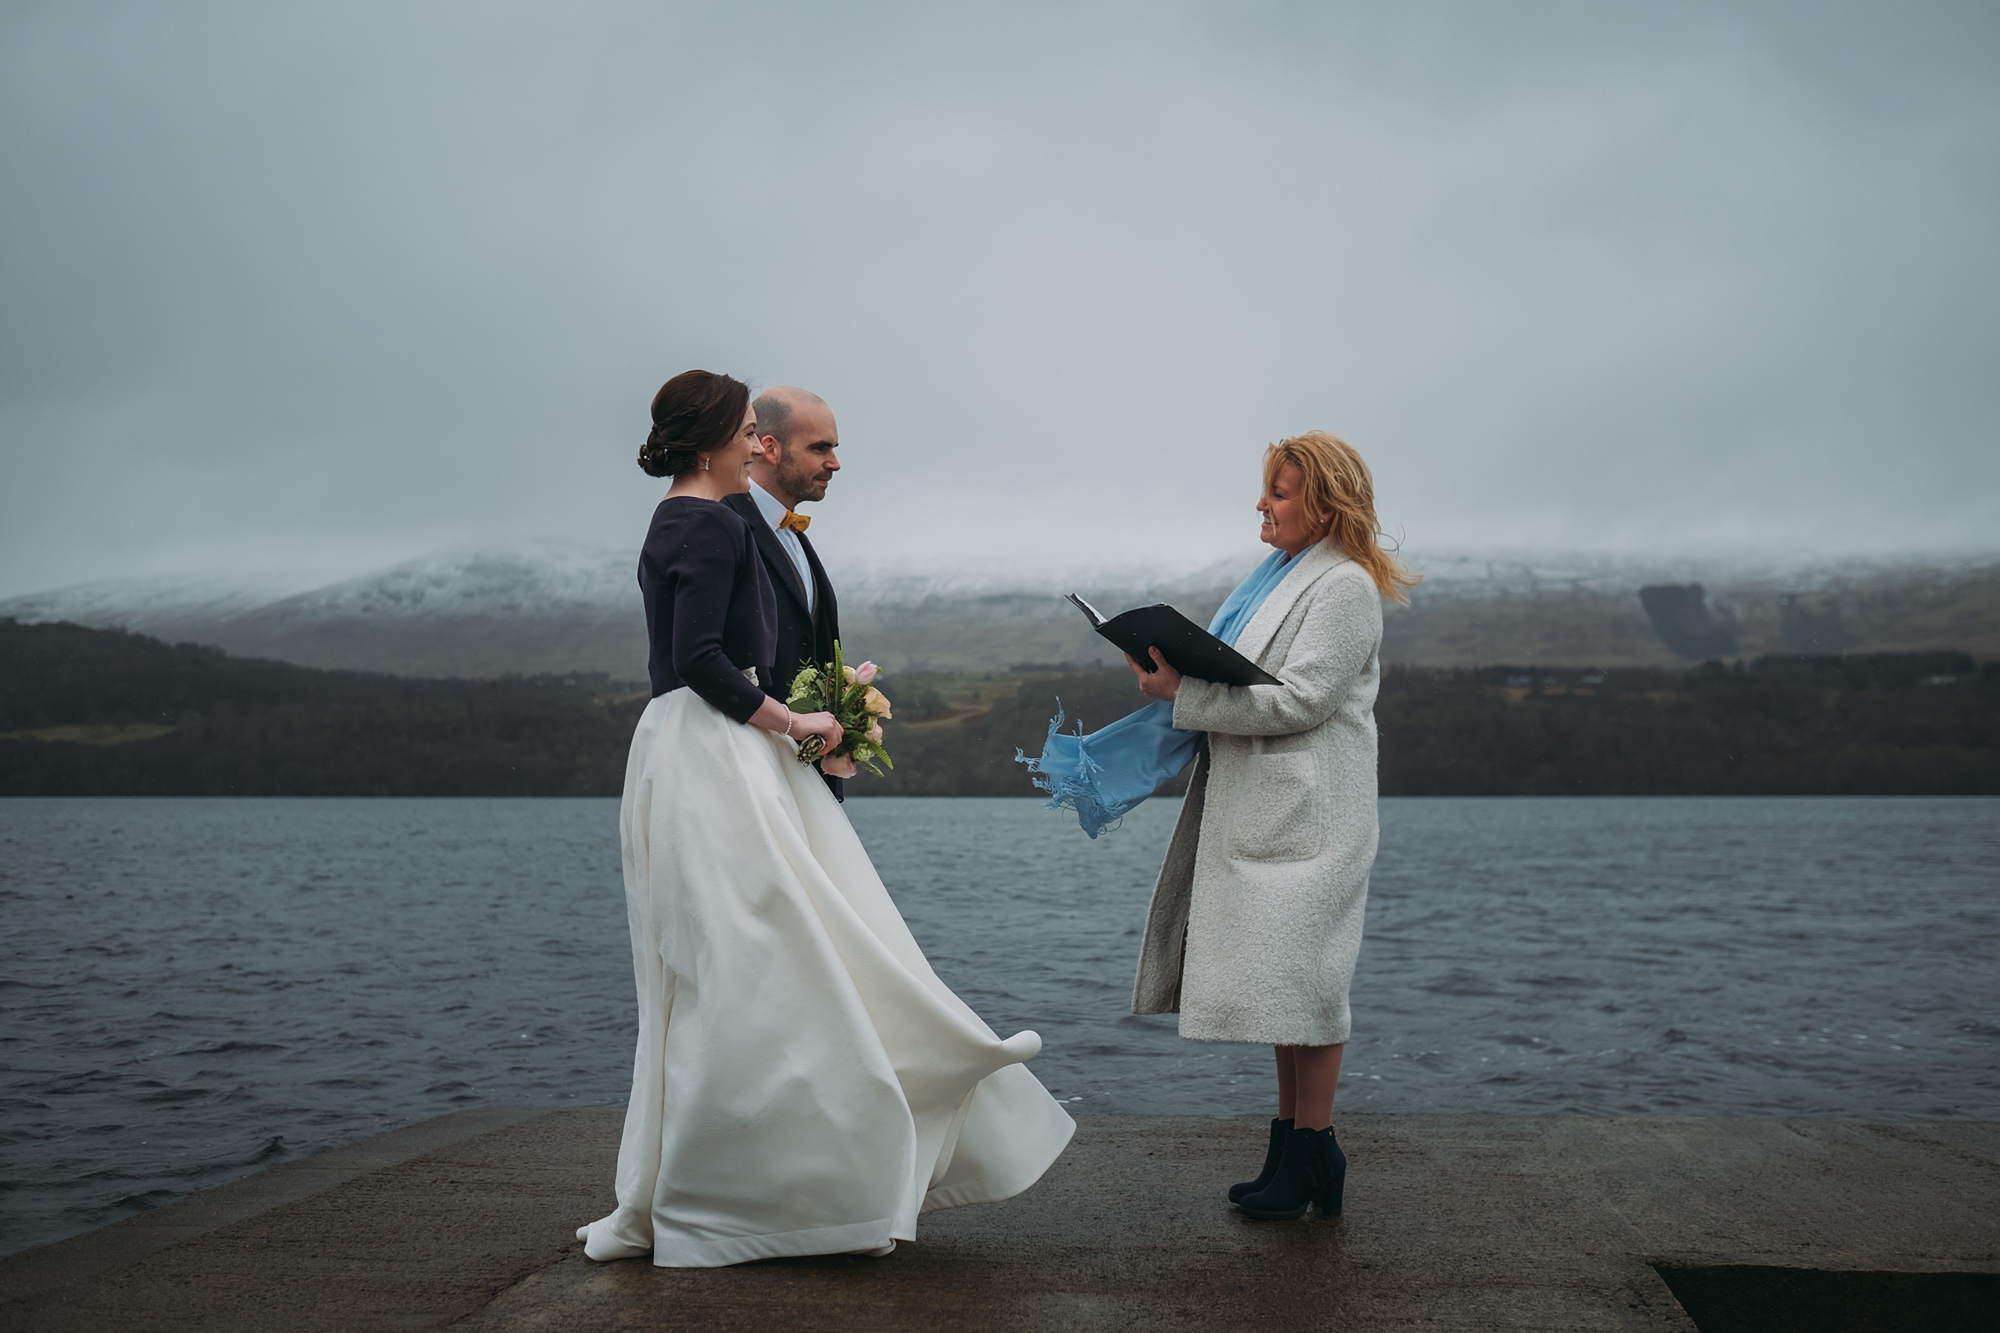 Eloping to Scotland at Ardeonaig - a 4 minute outdoor humanist ceremony with Jennifer Buchan